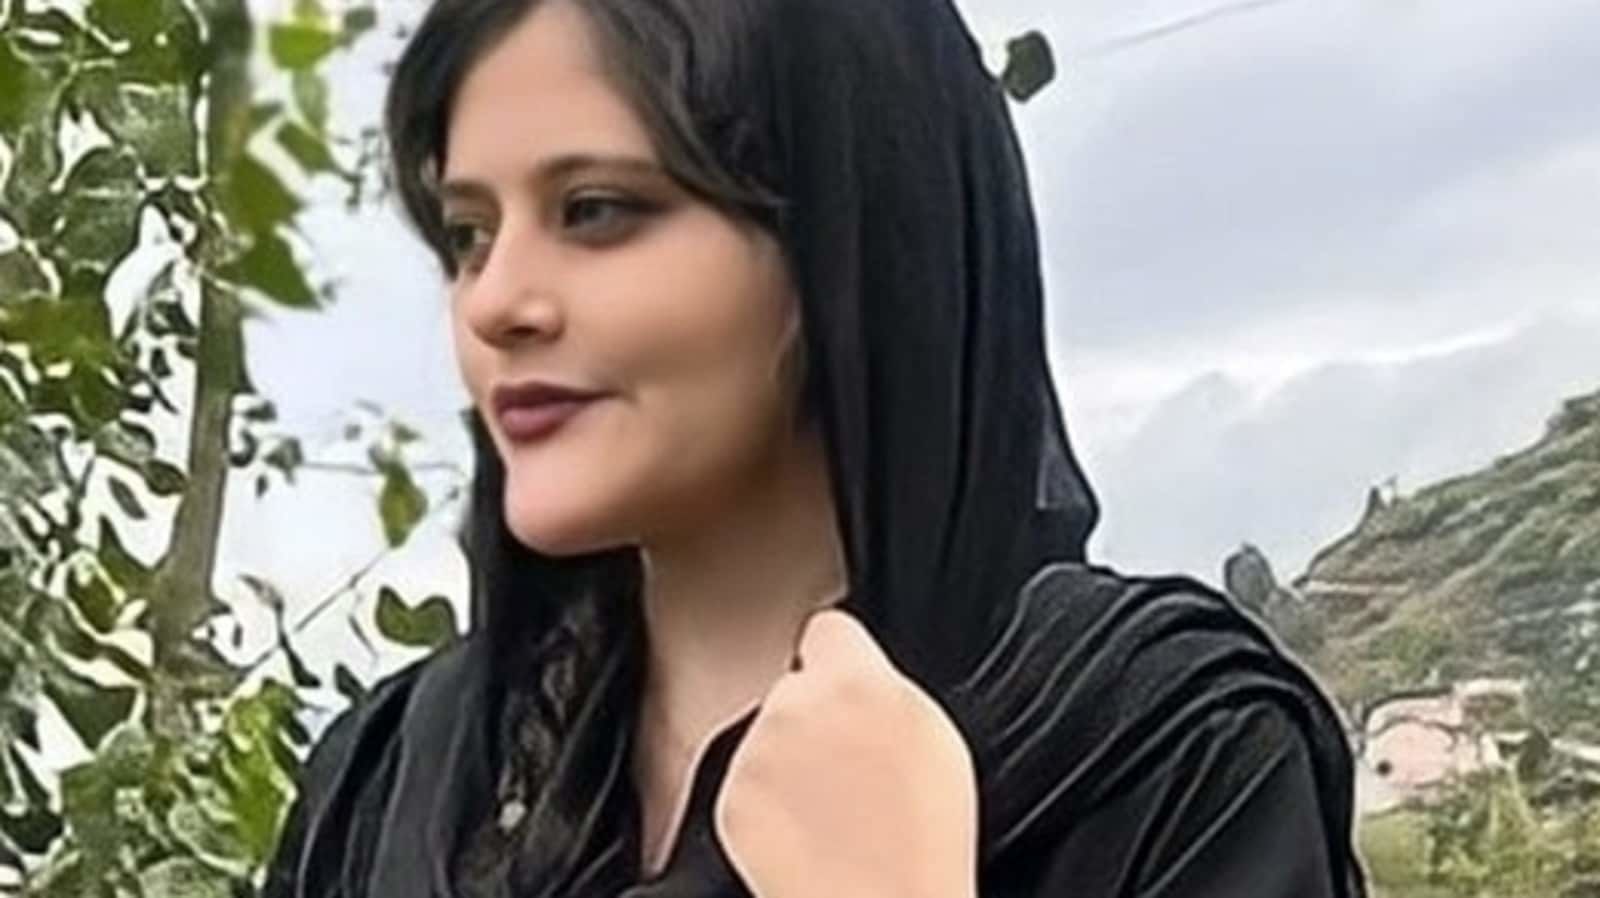 Mahsa Amini Wins! Iran has officially cancelled the morality police!